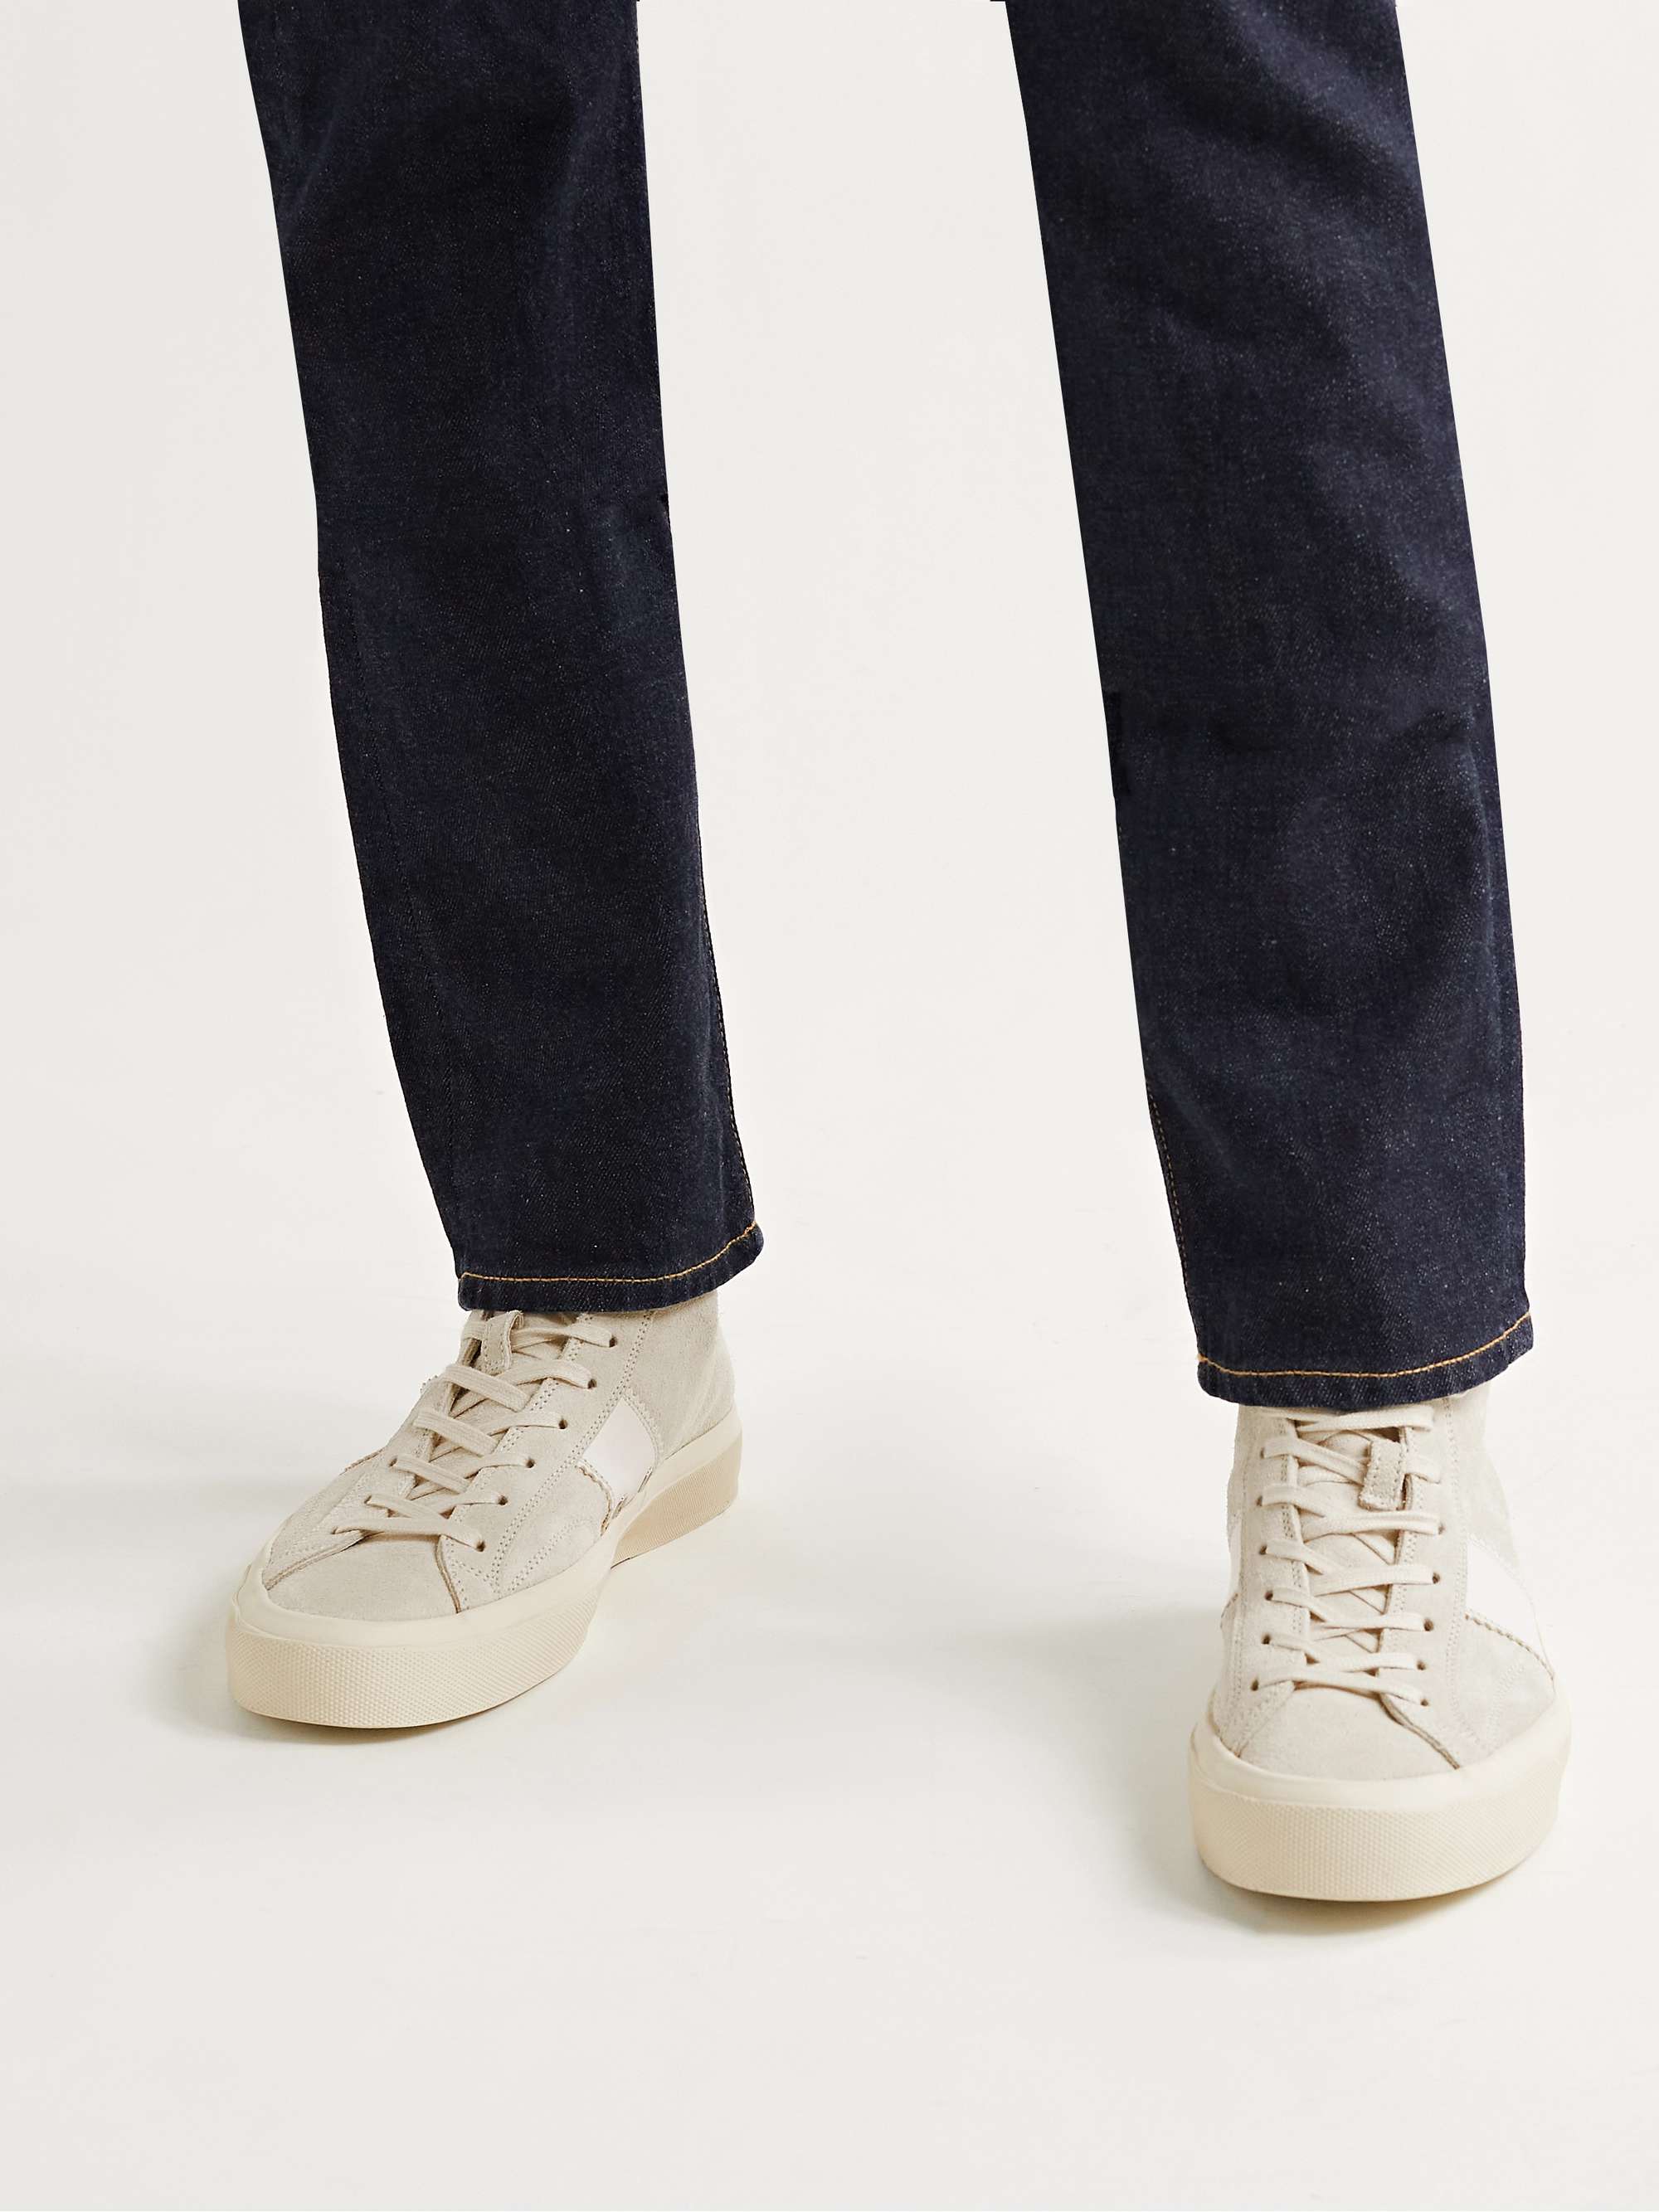 TOM FORD Cambridge Leather-Trimmed Suede High-Top Sneakers